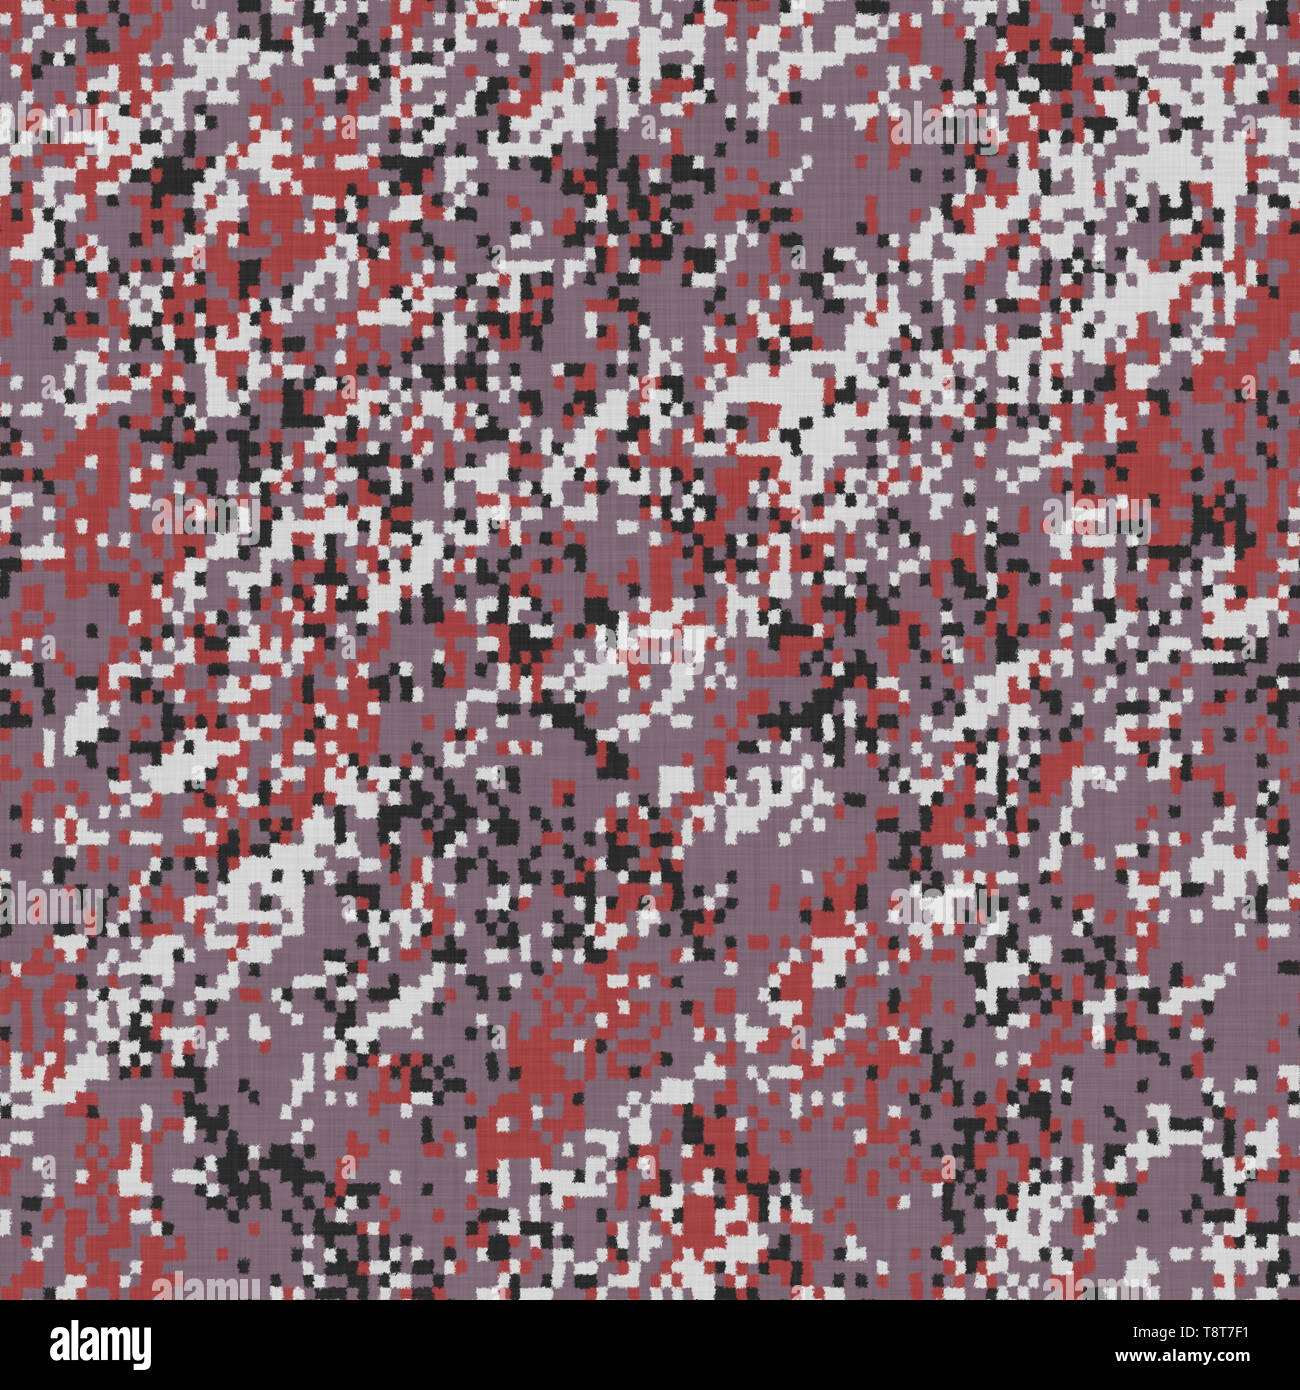 Red Digital Camouflage Seamless Texture Tile Stock Photo